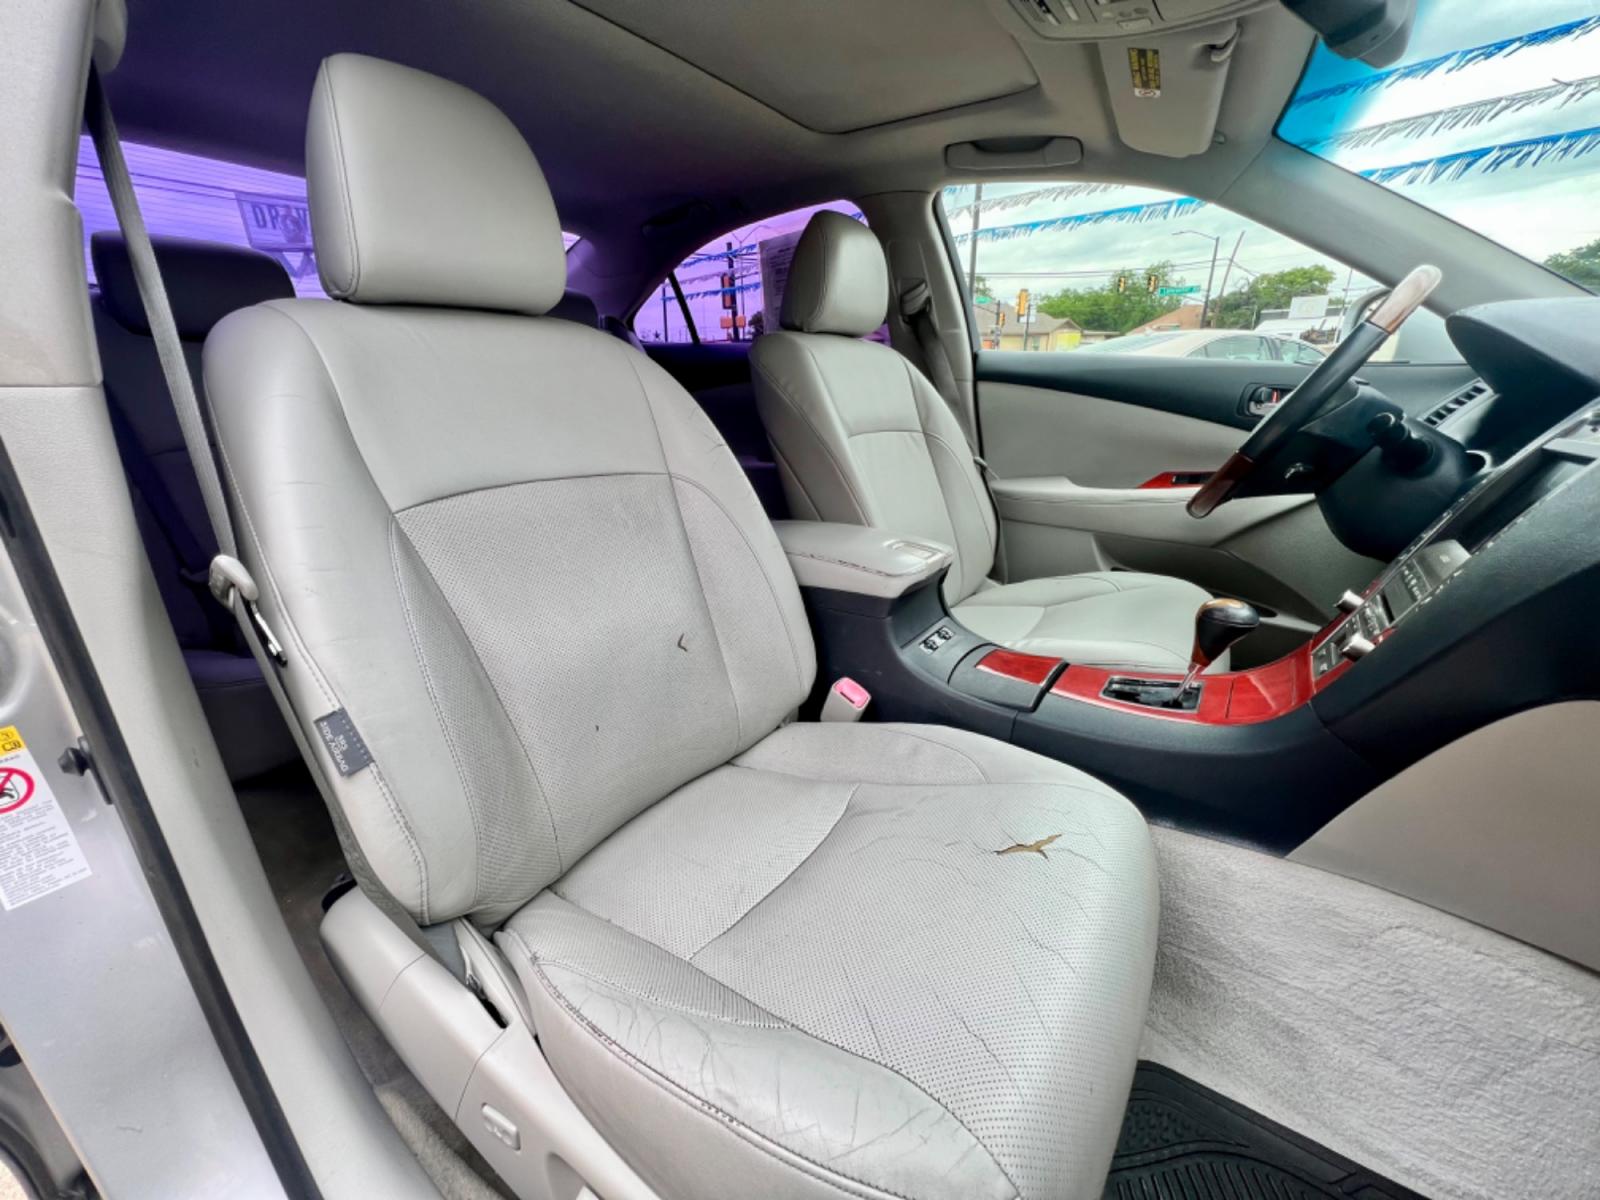 2007 SILVER LEXUS ES 350 BASE (JTHBJ46G072) , located at 5900 E. Lancaster Ave., Fort Worth, TX, 76112, (817) 457-5456, 0.000000, 0.000000 - CASH CAR ONLY, NO FINANCING AVAILABLE. WE'VE SLASHED THE PRICE! NOW ONLY $5,391! THIS 2007 LEXUS ES 350 BASE 4 DOOR SEDAN RUNS AND DRIVES GREAT. IT IS EQUIPPED WITH A CD PLAYER, AM/FM RADIO AND AN AUX PORT. THE TIRES ARE IN GOOD CONDITION AND STILL HAVE TREAD LEFT ON THEM. THIS CAR WILL NOT LAST S - Photo #15